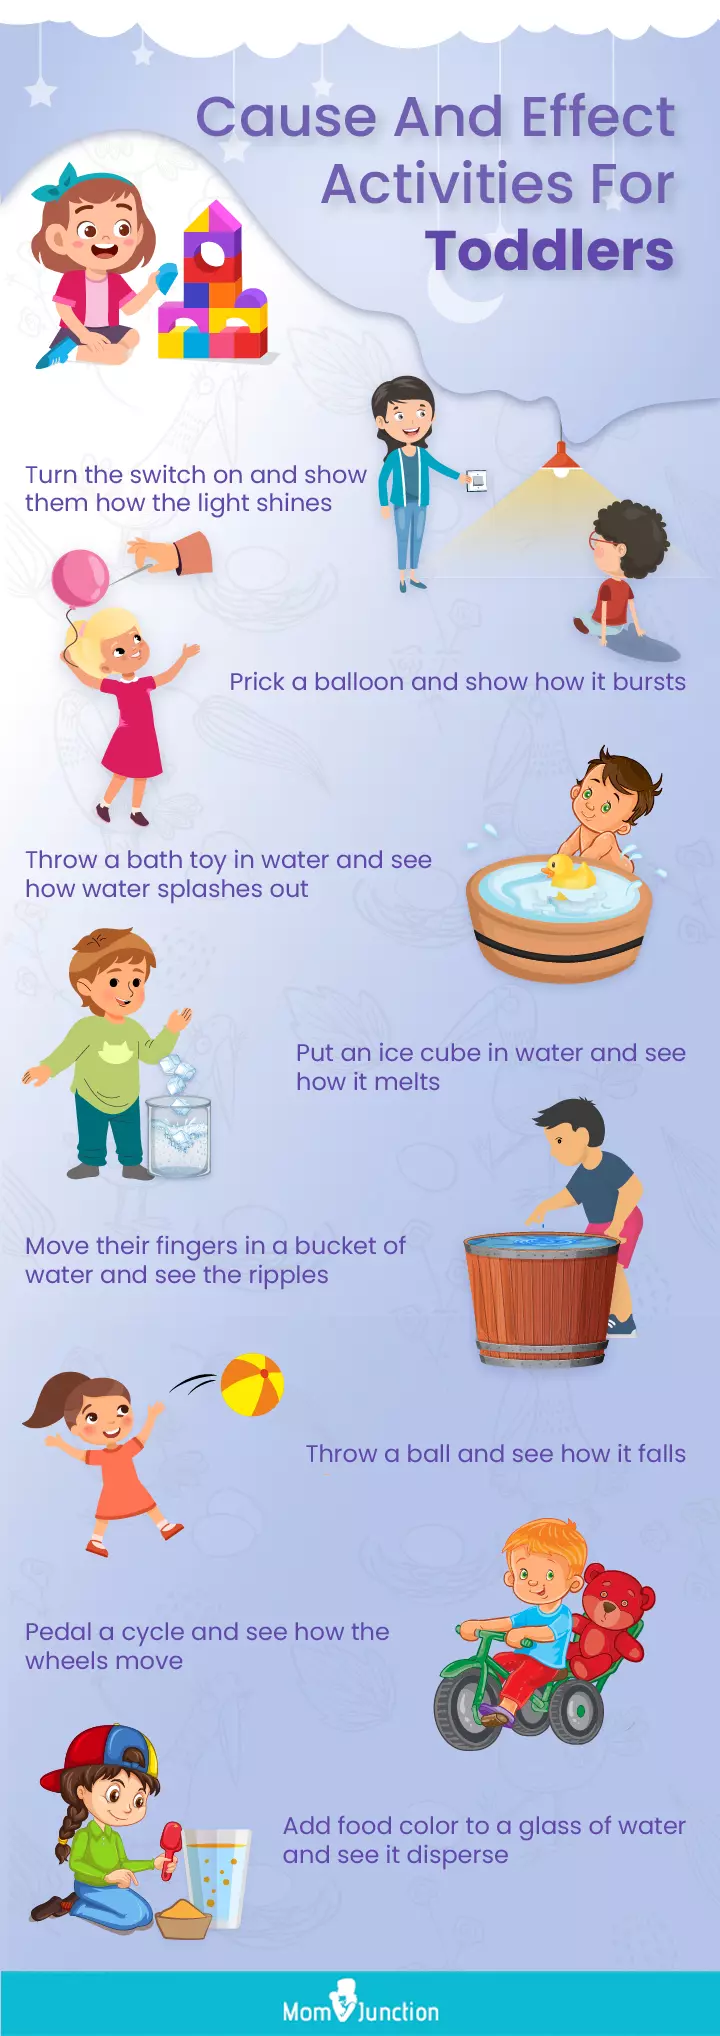 cause and effect activities for toddlers (infographic)